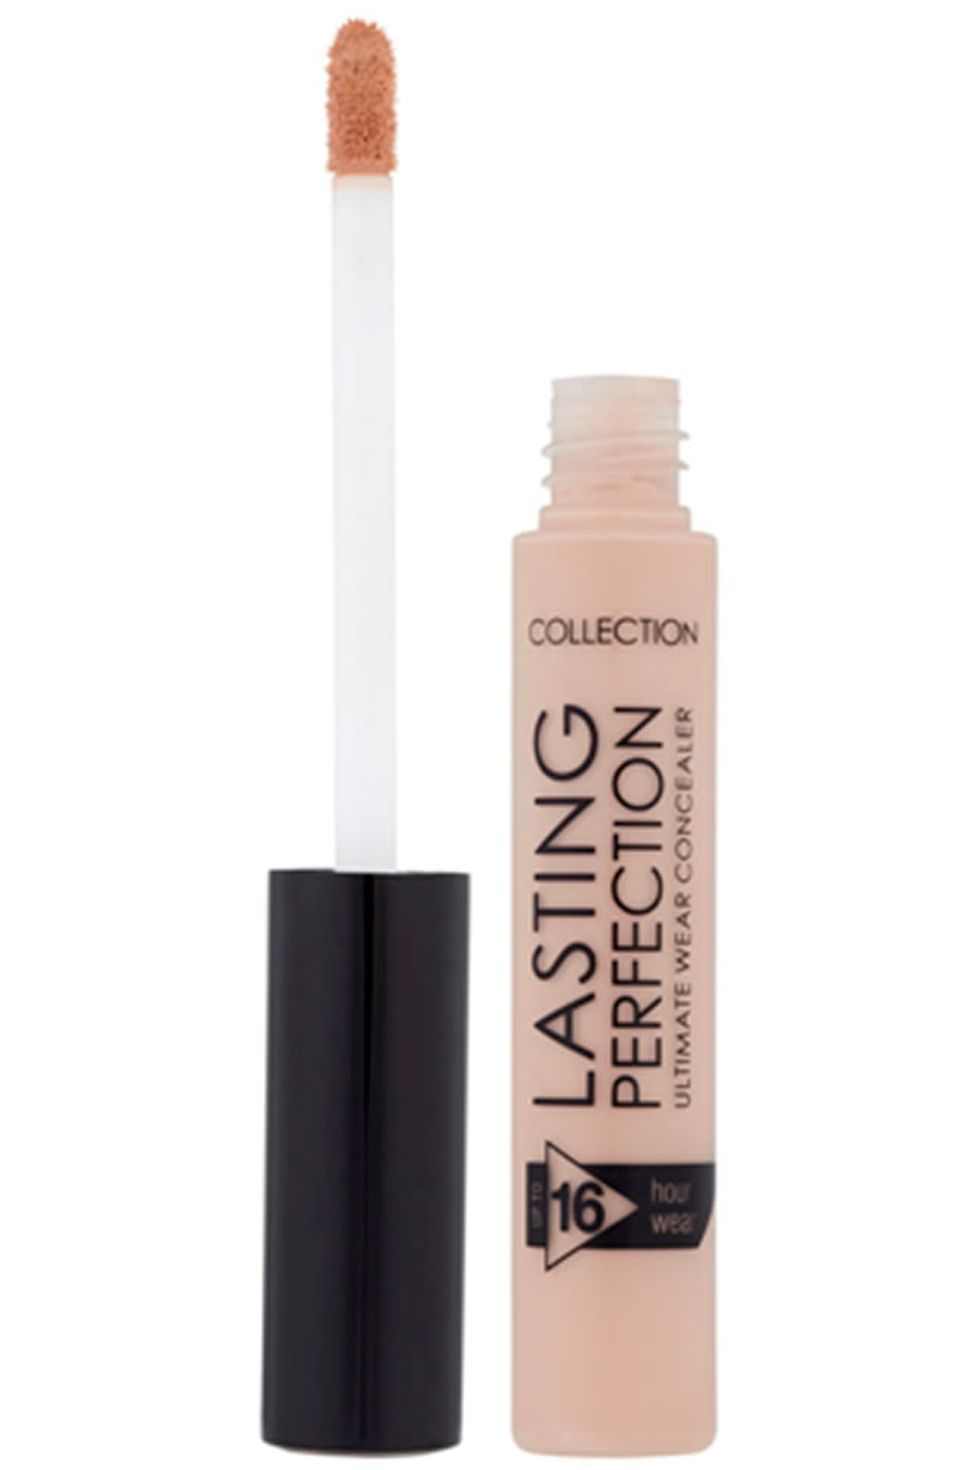 Collection lasting perfection concealer